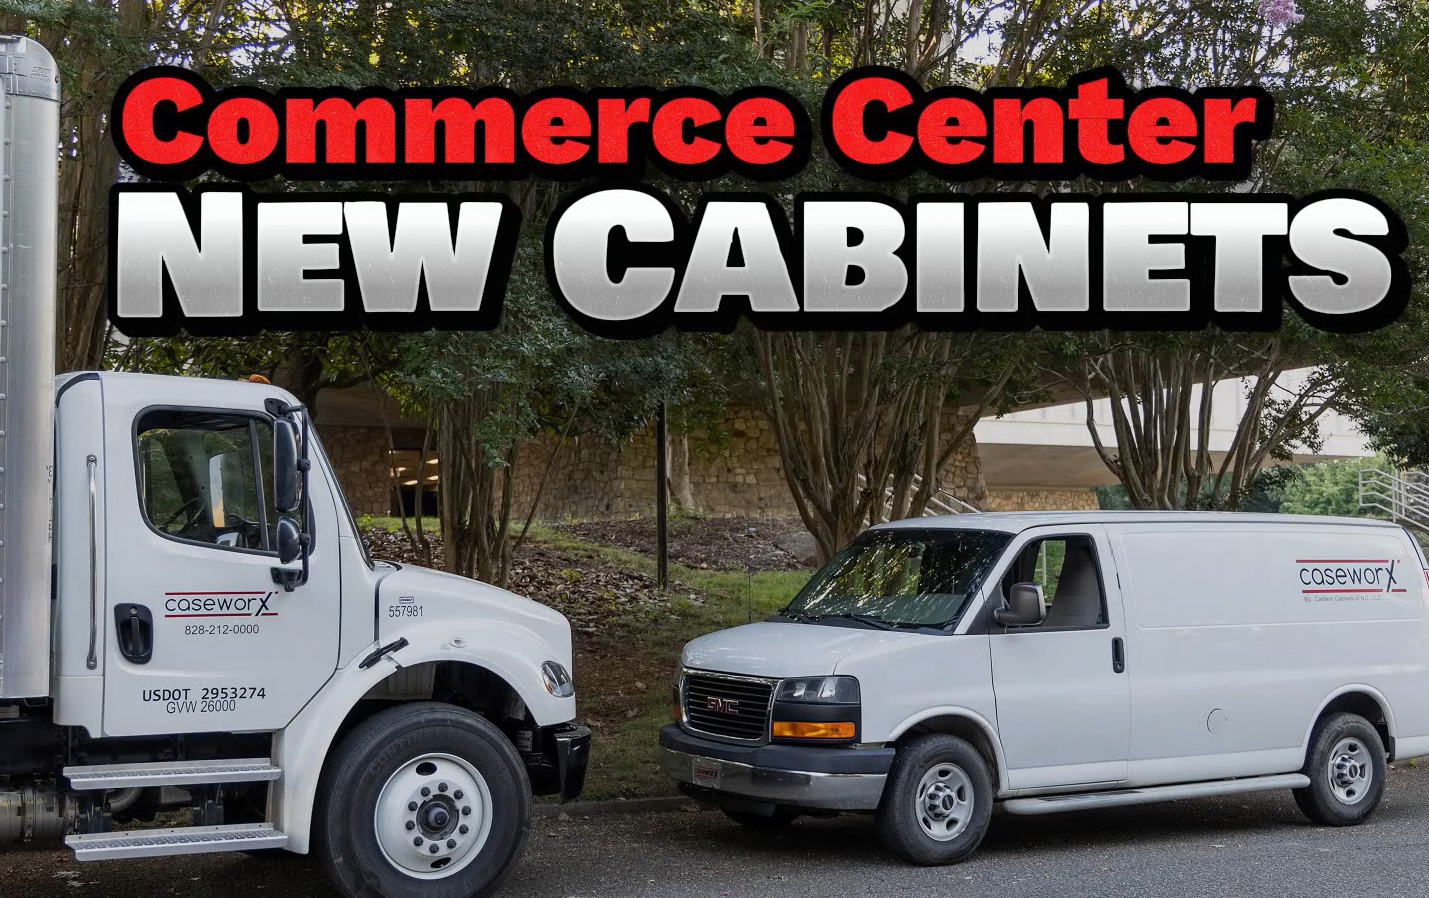 Video Screenshot for Caseworx cabinet installation at the Caldwell County Commerce Center